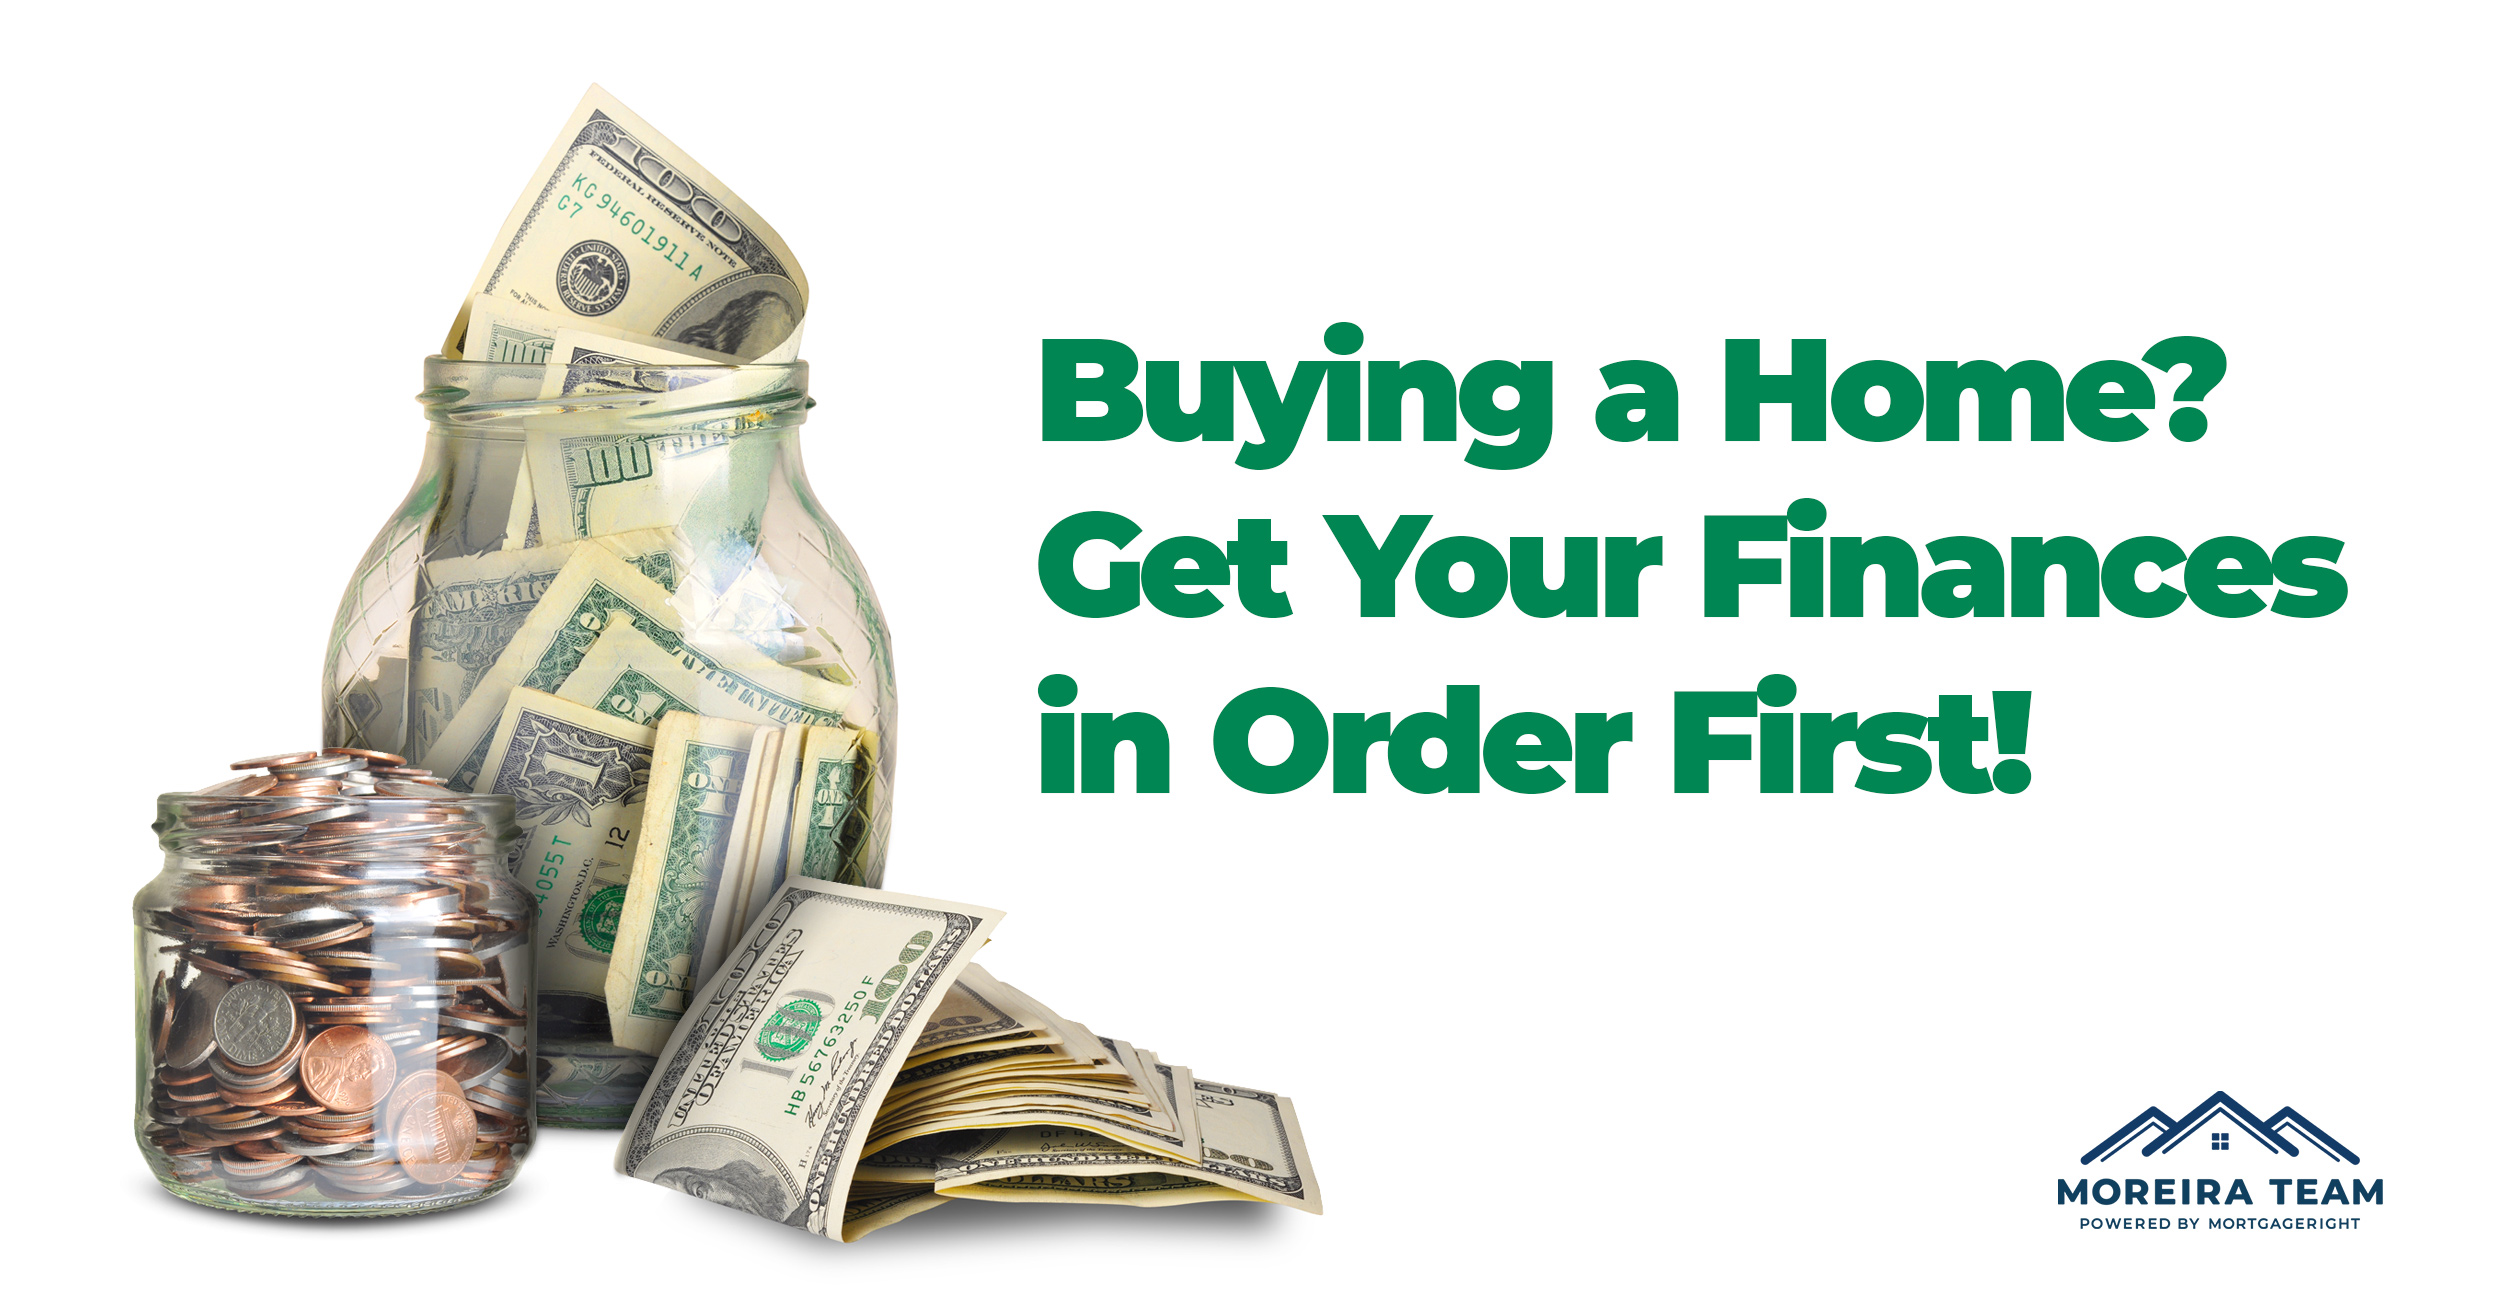 Buying a Home? Get Your Finances in Order First!